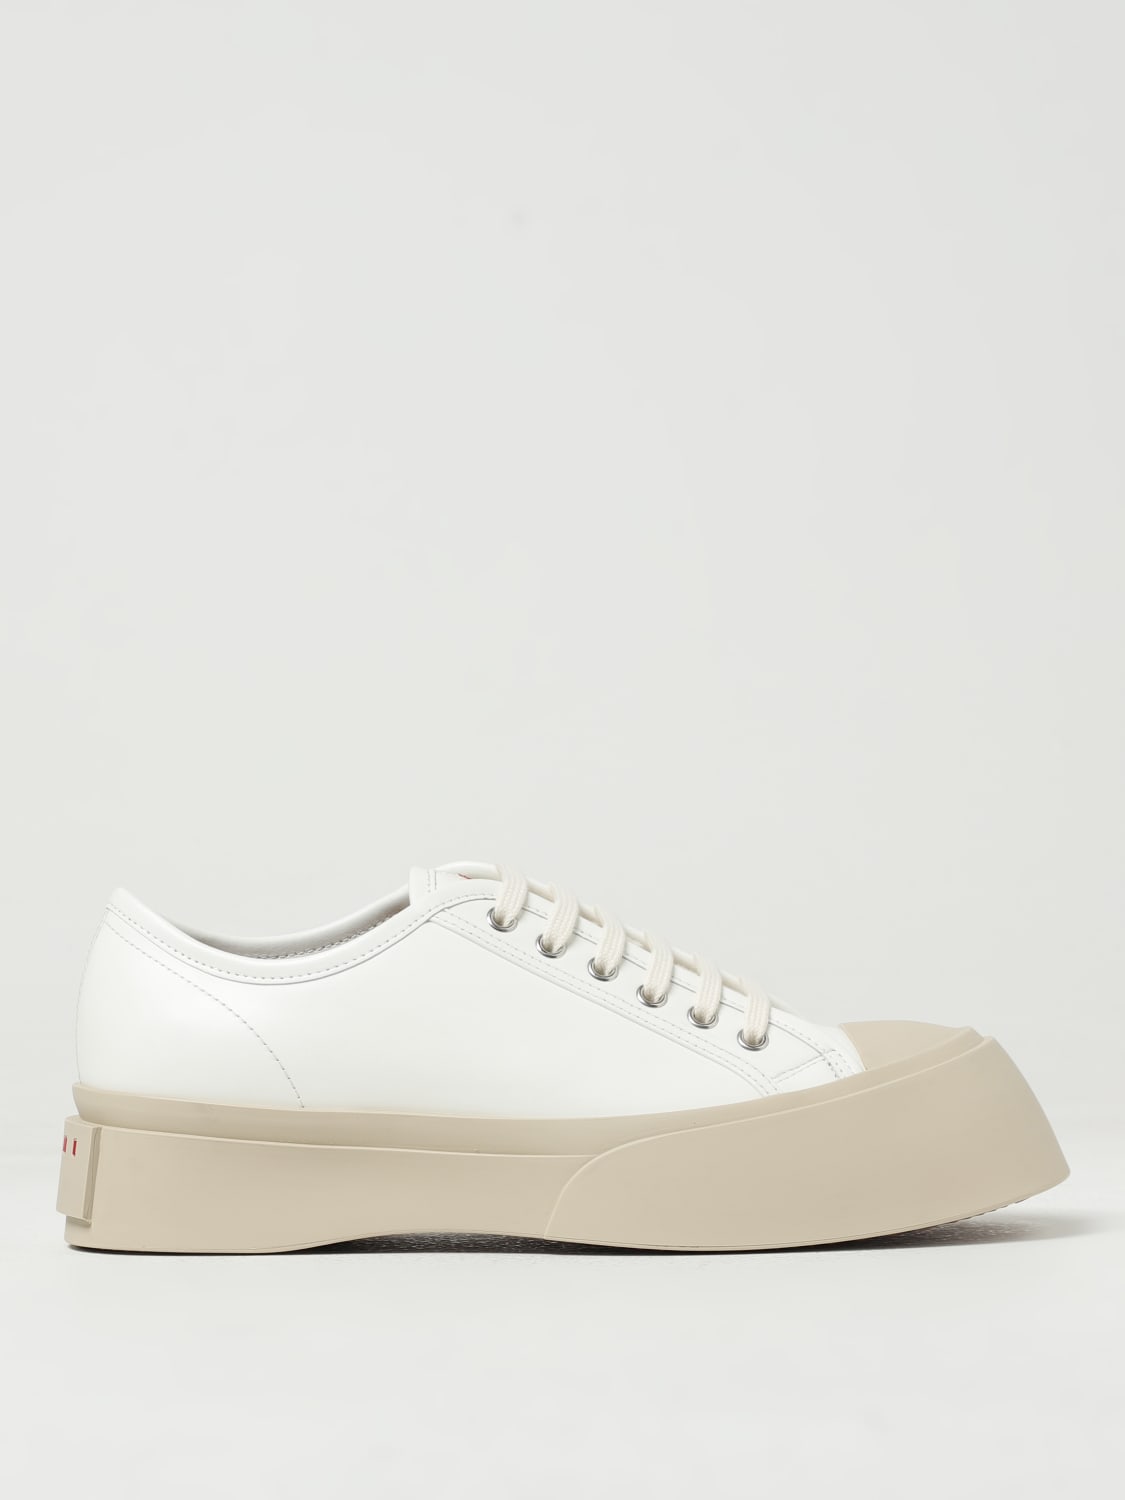 Marni Pablo Laced Up Shoe in Black/White – Hampden Clothing